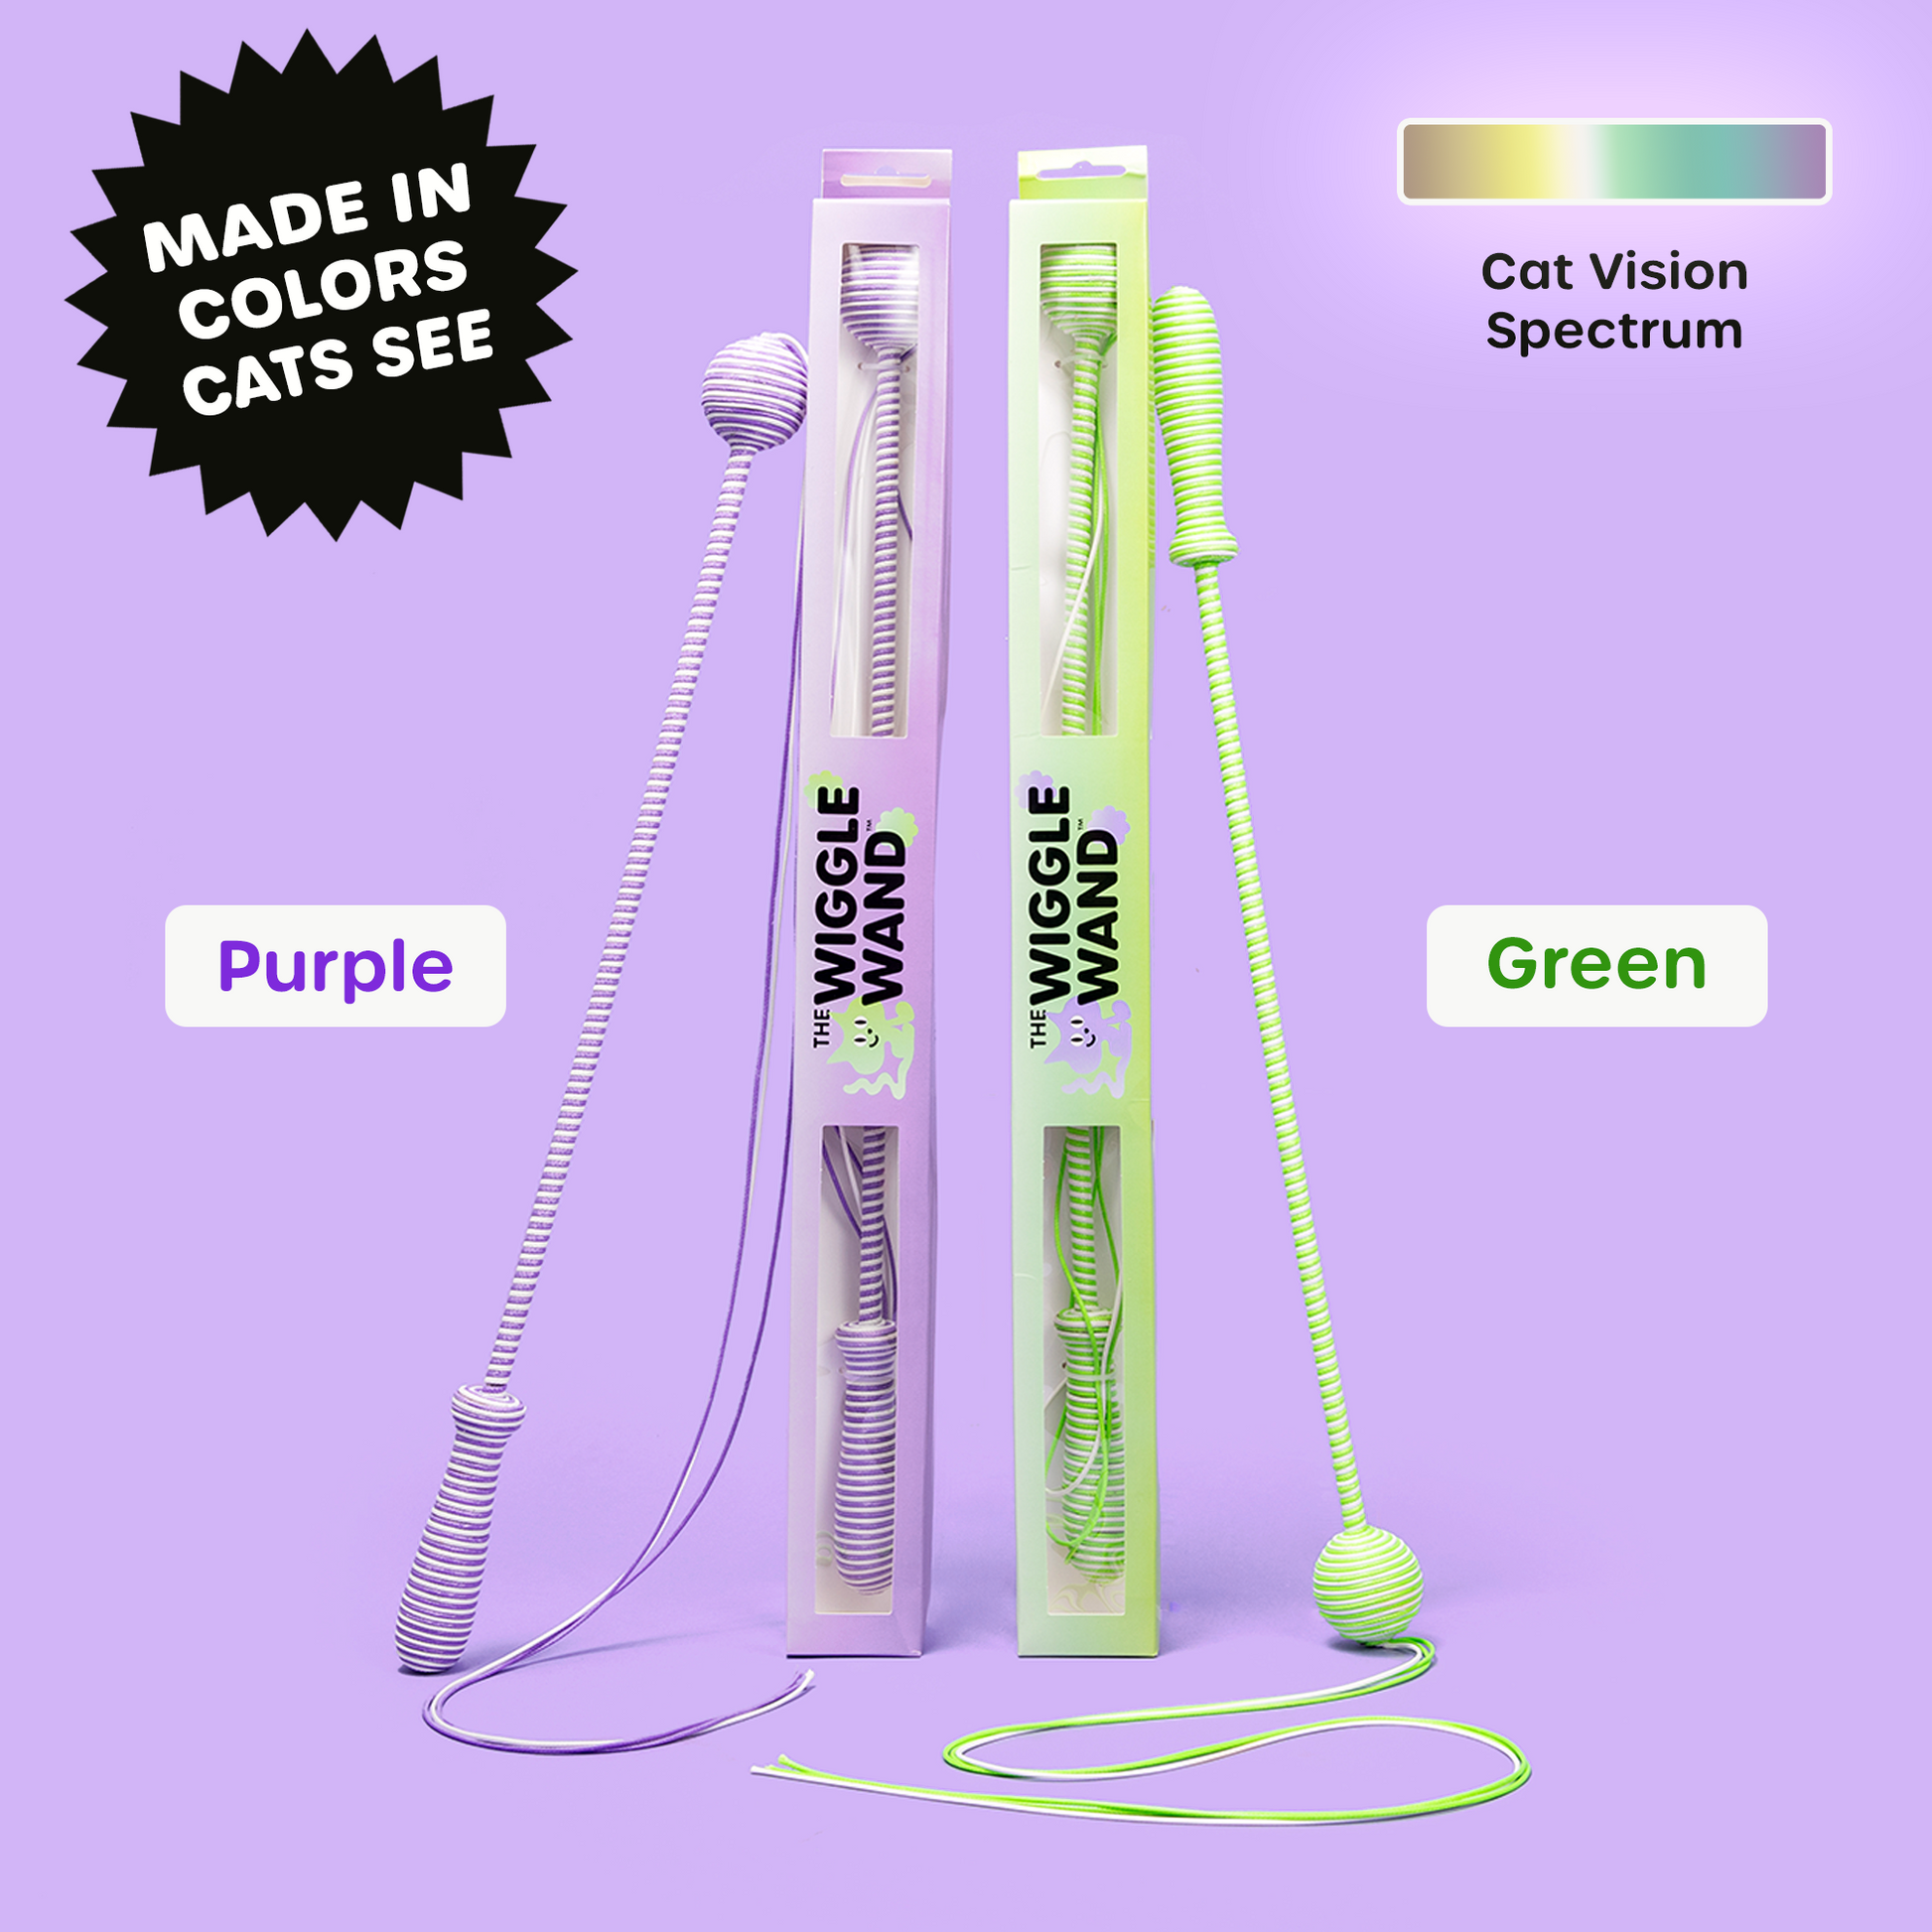 Side-by-side image of the Wiggle Wand™ Cat Toys in both vibrant green and stunning purple, showcasing the visually appealing color options designed to captivate cats' attention.